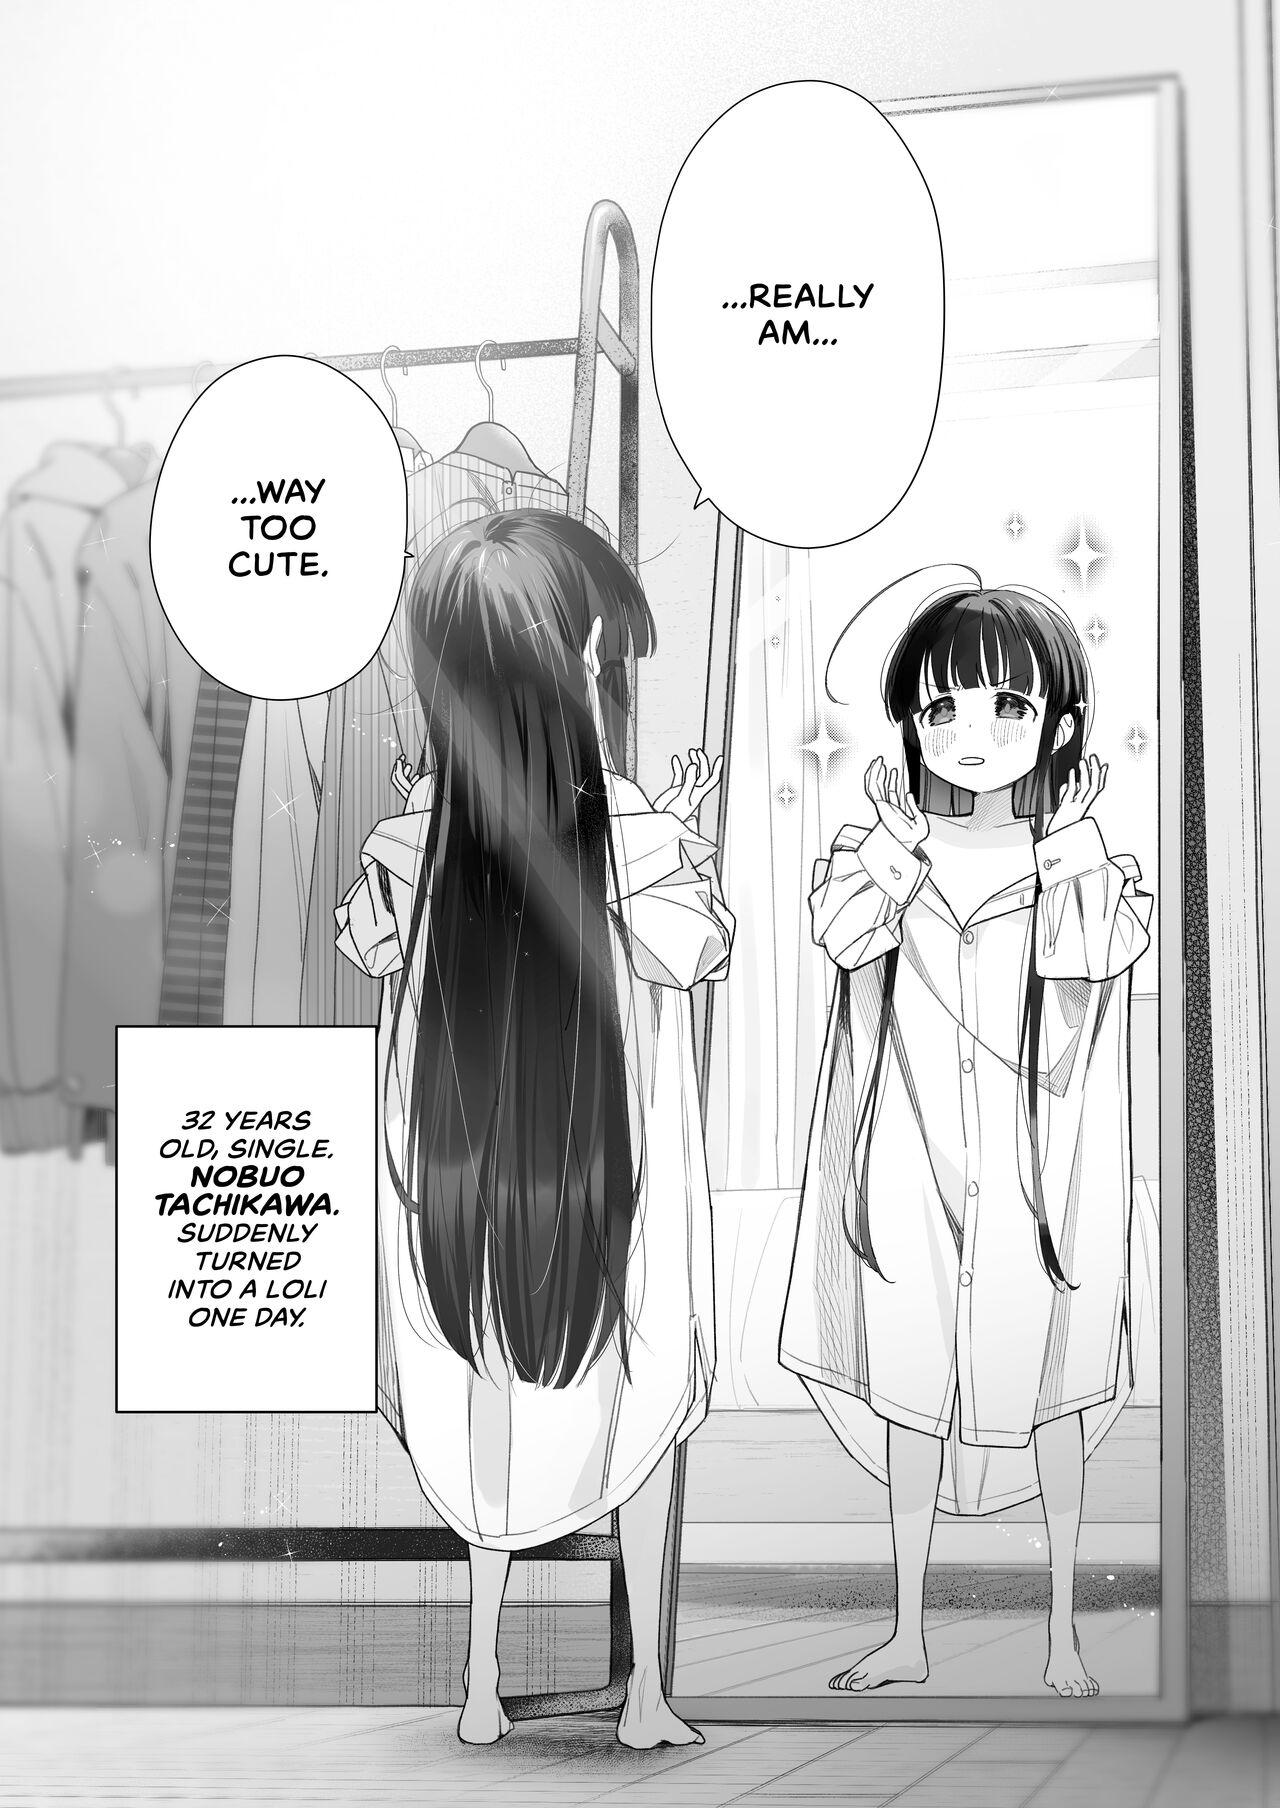 [Asunaro Neat. (Ronna)] TS Loli Oji-san no Bouken Onanie Hen | The Adventures of an Old Man Who Was Gender-Swapped Into a Loli ~Masturbation Chapter~ [English] [CulturedCommissions] [Digital] 2